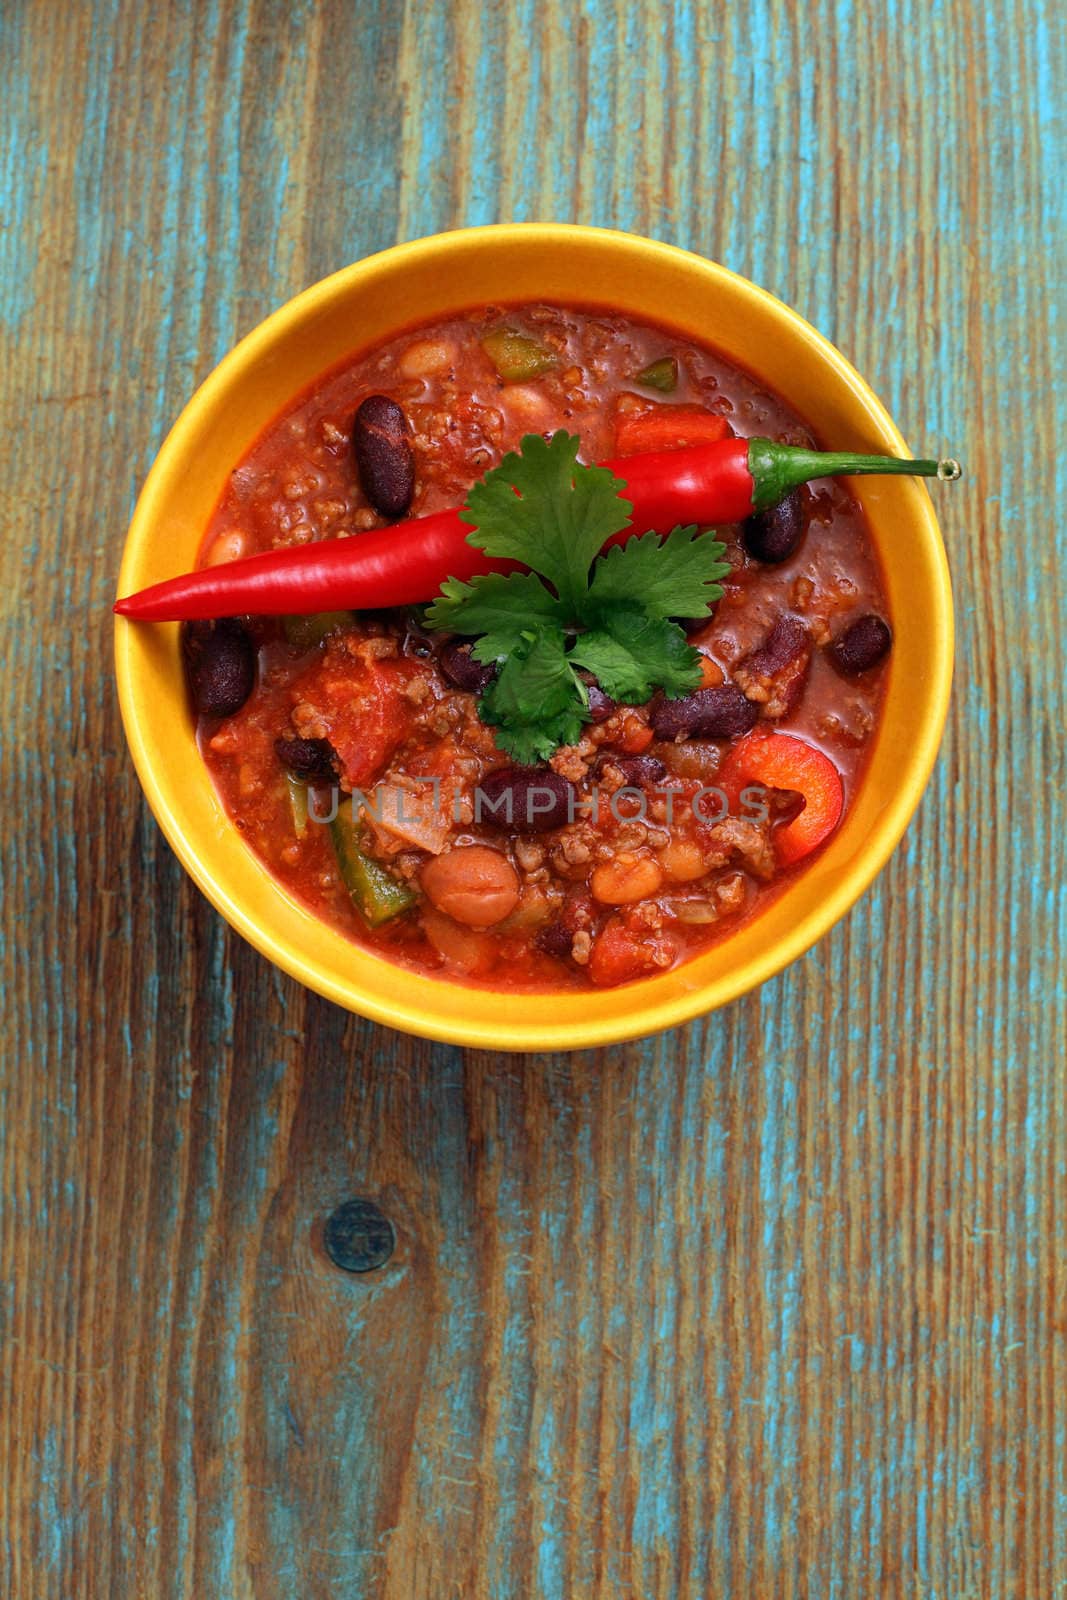 Bowl of chili by sumners